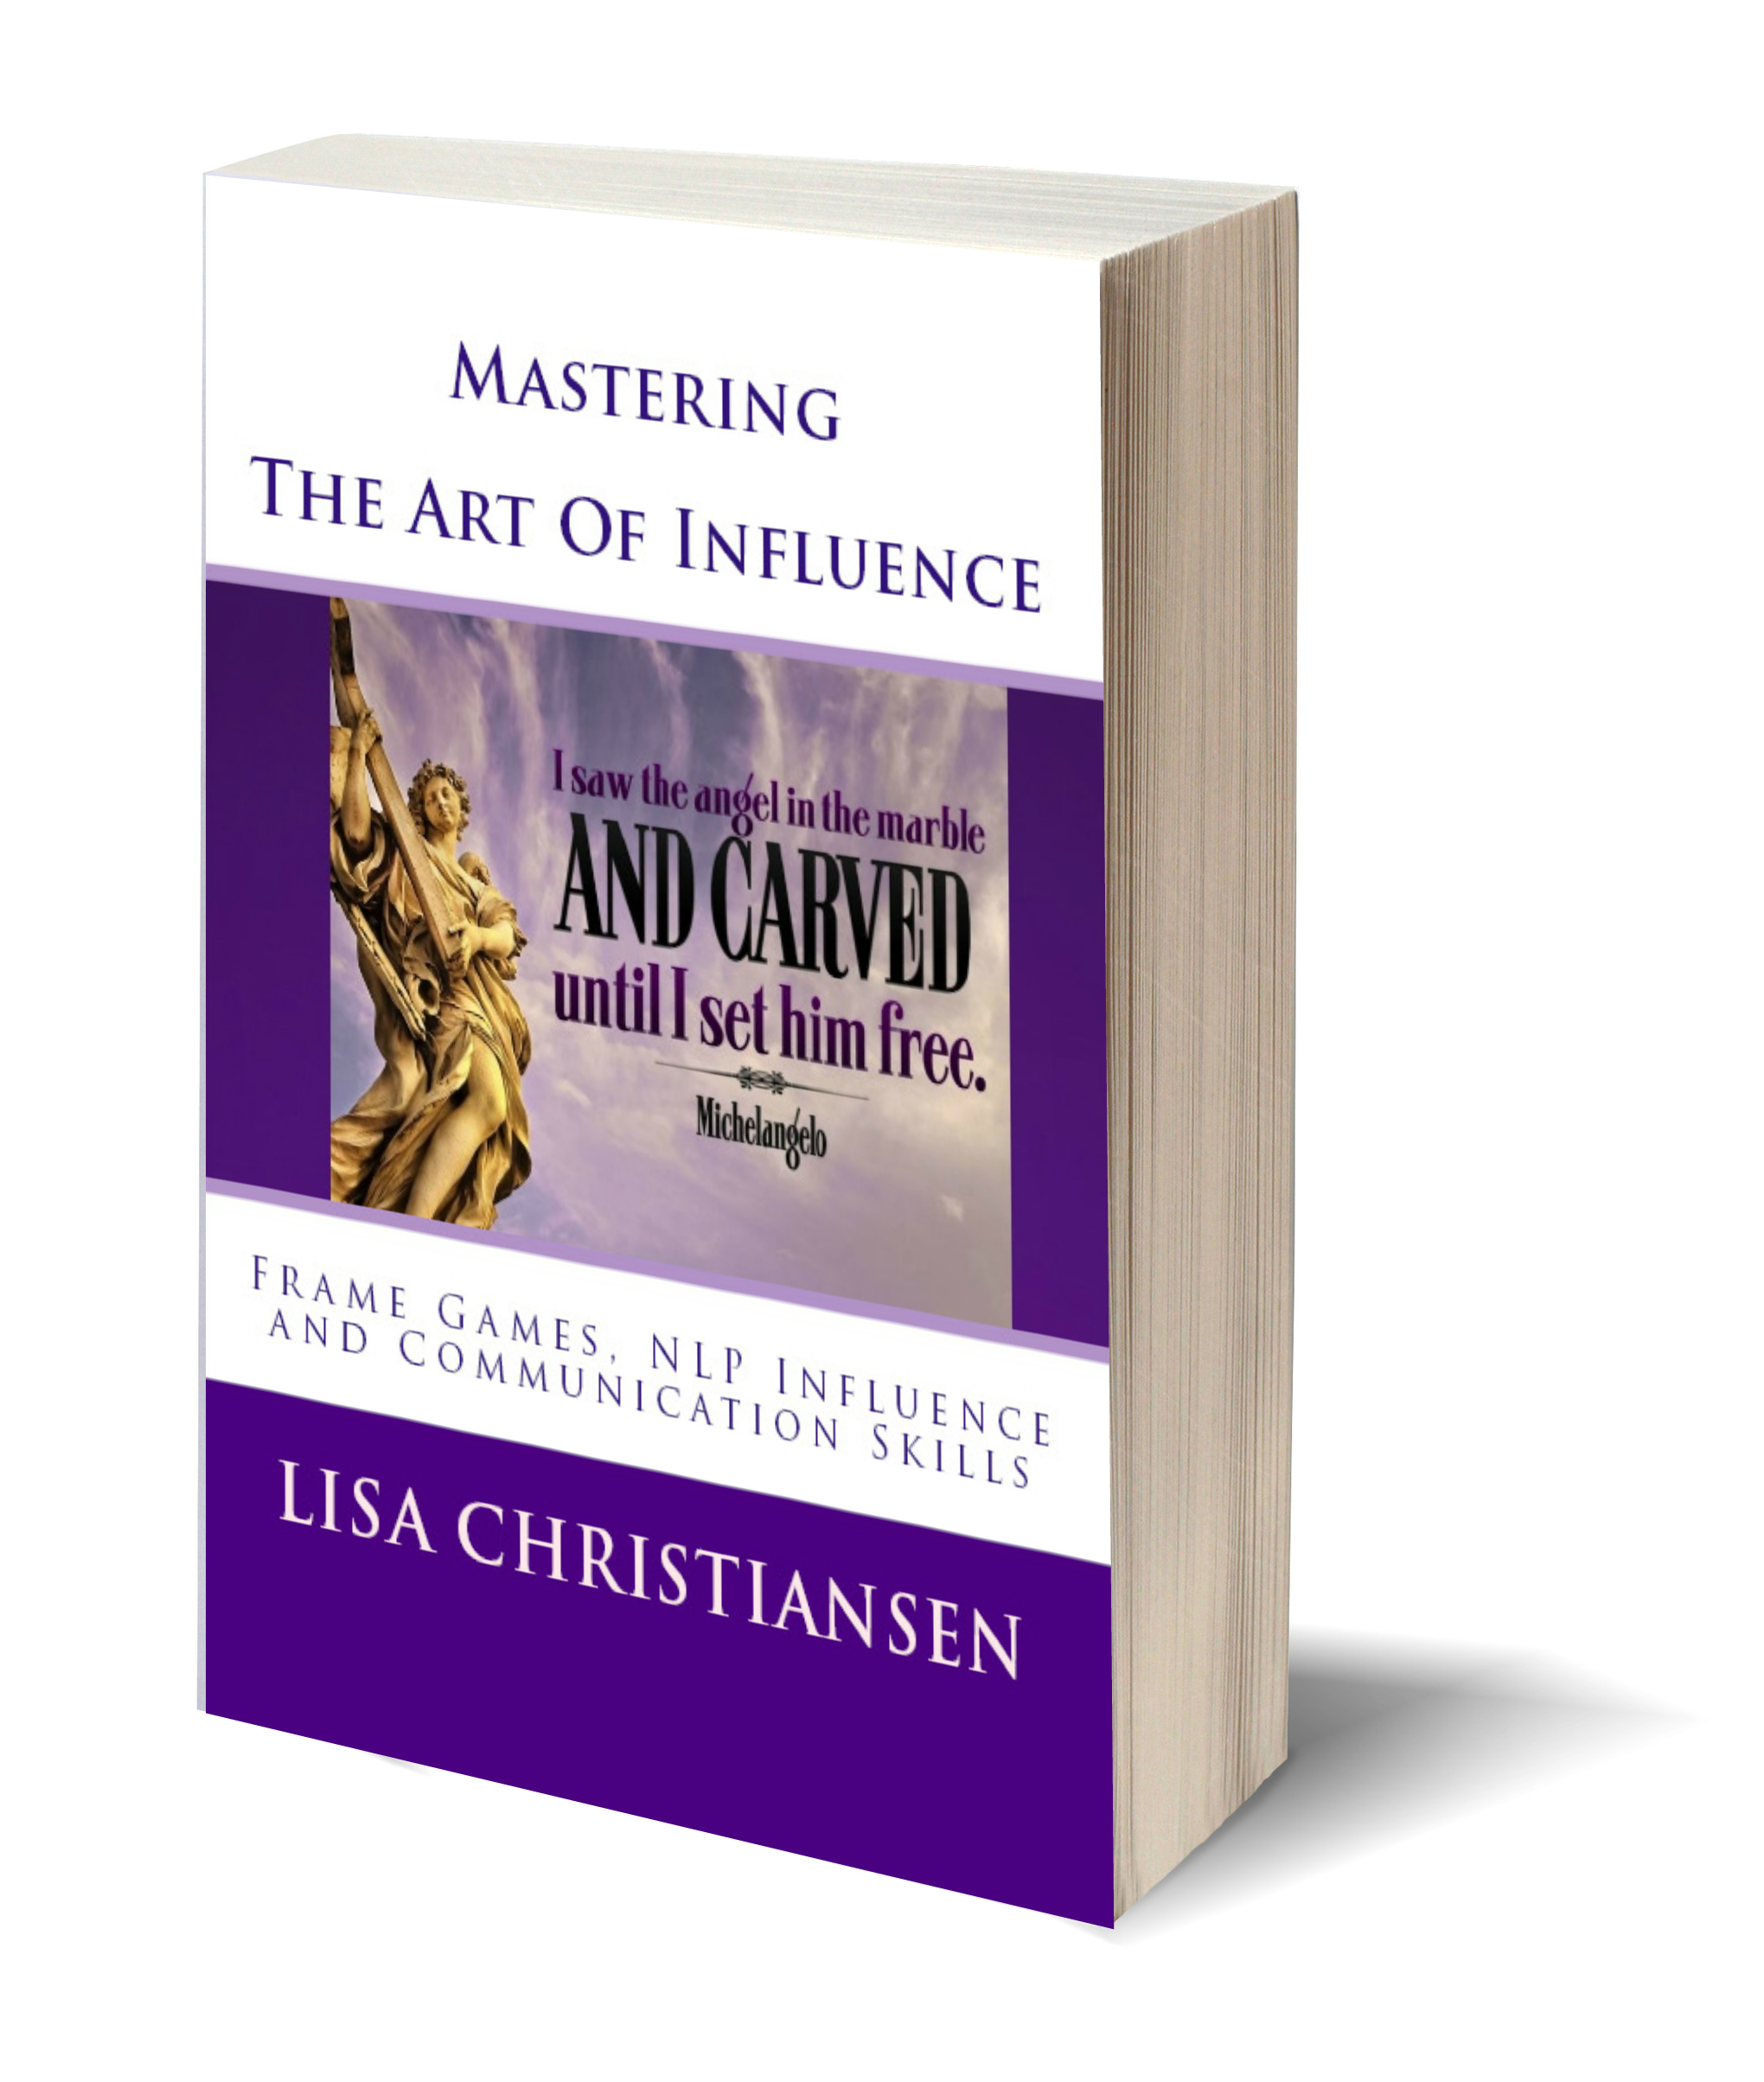 Filled with user friendly NLP, Influence and communication games designed to be playful and engaging. http://www.amazon.com/Mastering-Art-Influence-Made-Easy/dp/0615891853/ref=la_B00FB32P2C_1_4?s=books&ie=UTF8&qid=1392750176&sr=1-4